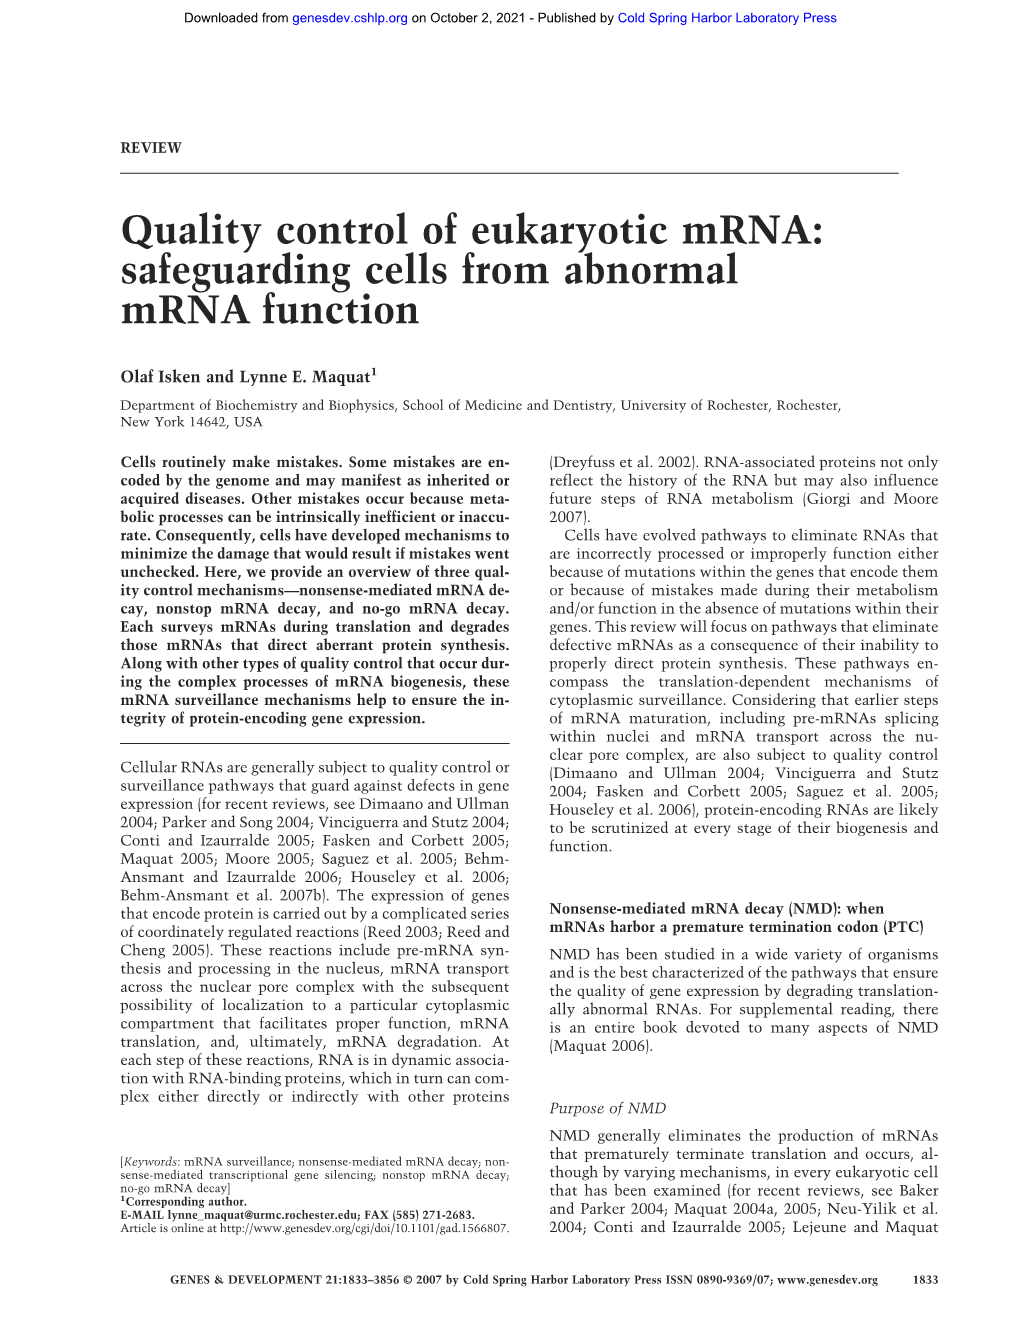 Quality Control of Eukaryotic Mrna: Safeguarding Cells from Abnormal Mrna Function